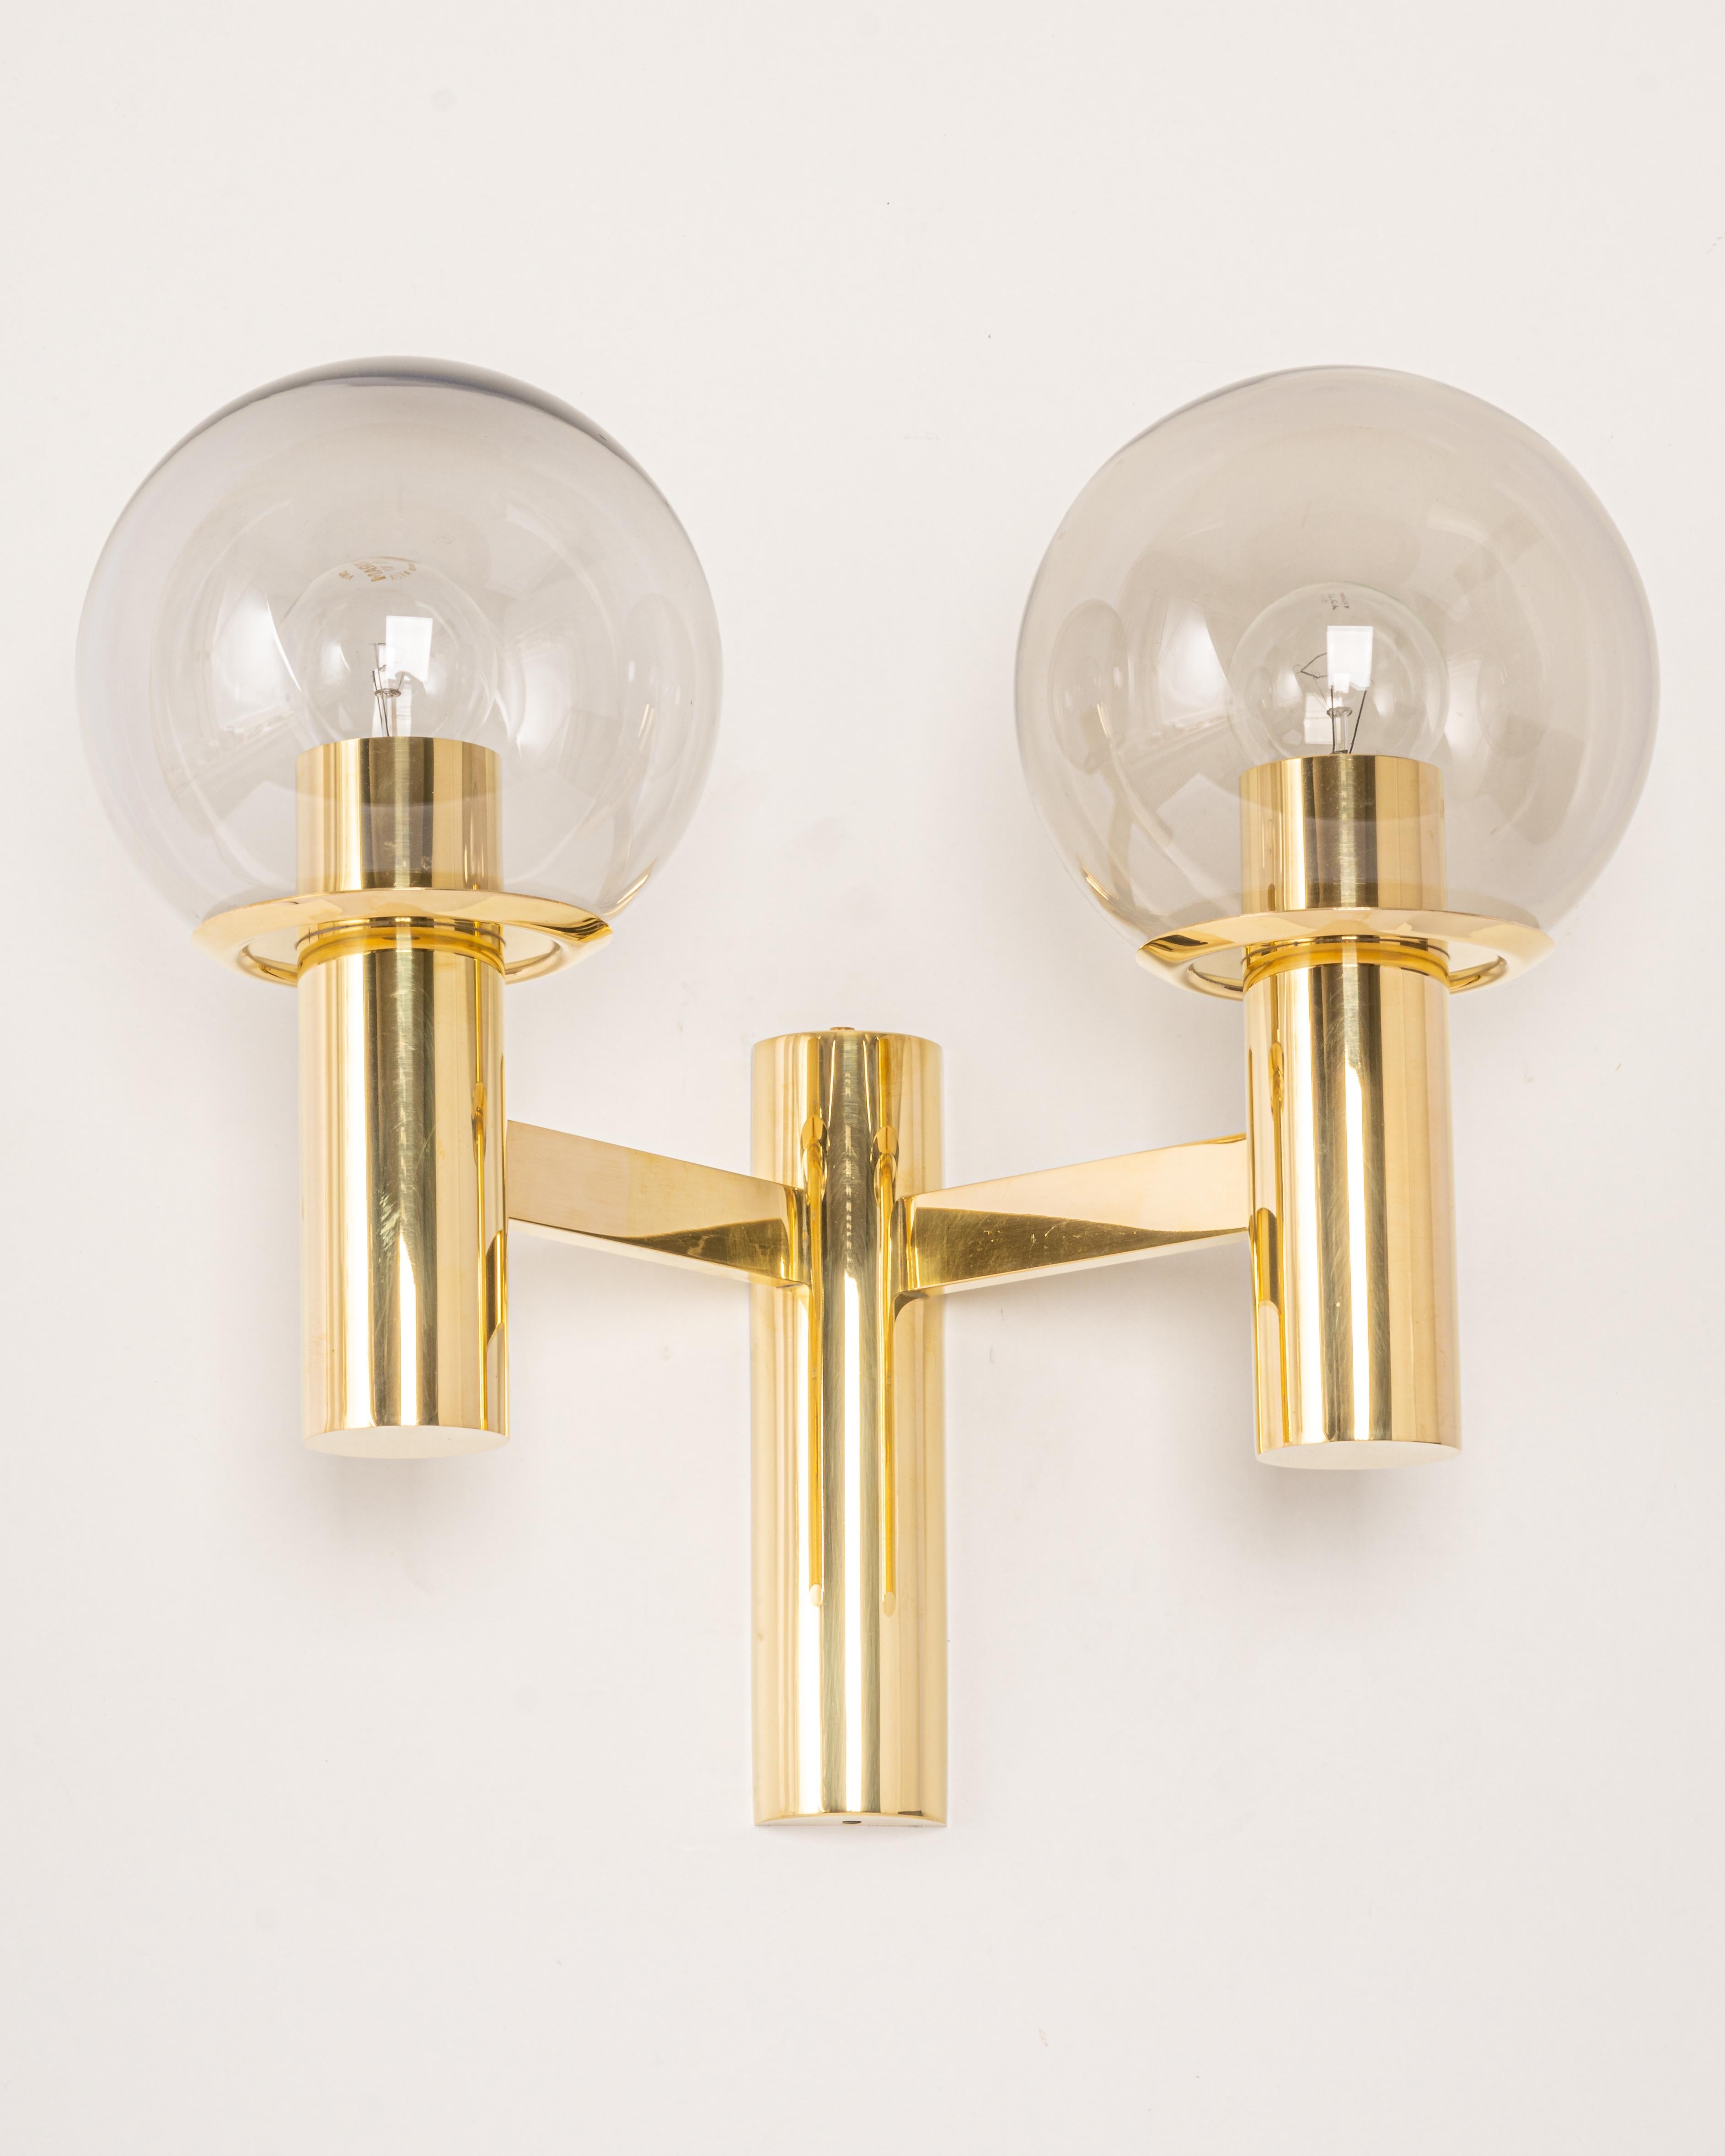 Pair of wall sconces in the manner of Sciolari, Made in Germany, 1970s.
Each sconce is composed of 2 smoked glasses with a brass base.

High quality and in very good condition. Cleaned, well-wired, and ready to use. 
Each sconce requires 2 x E27